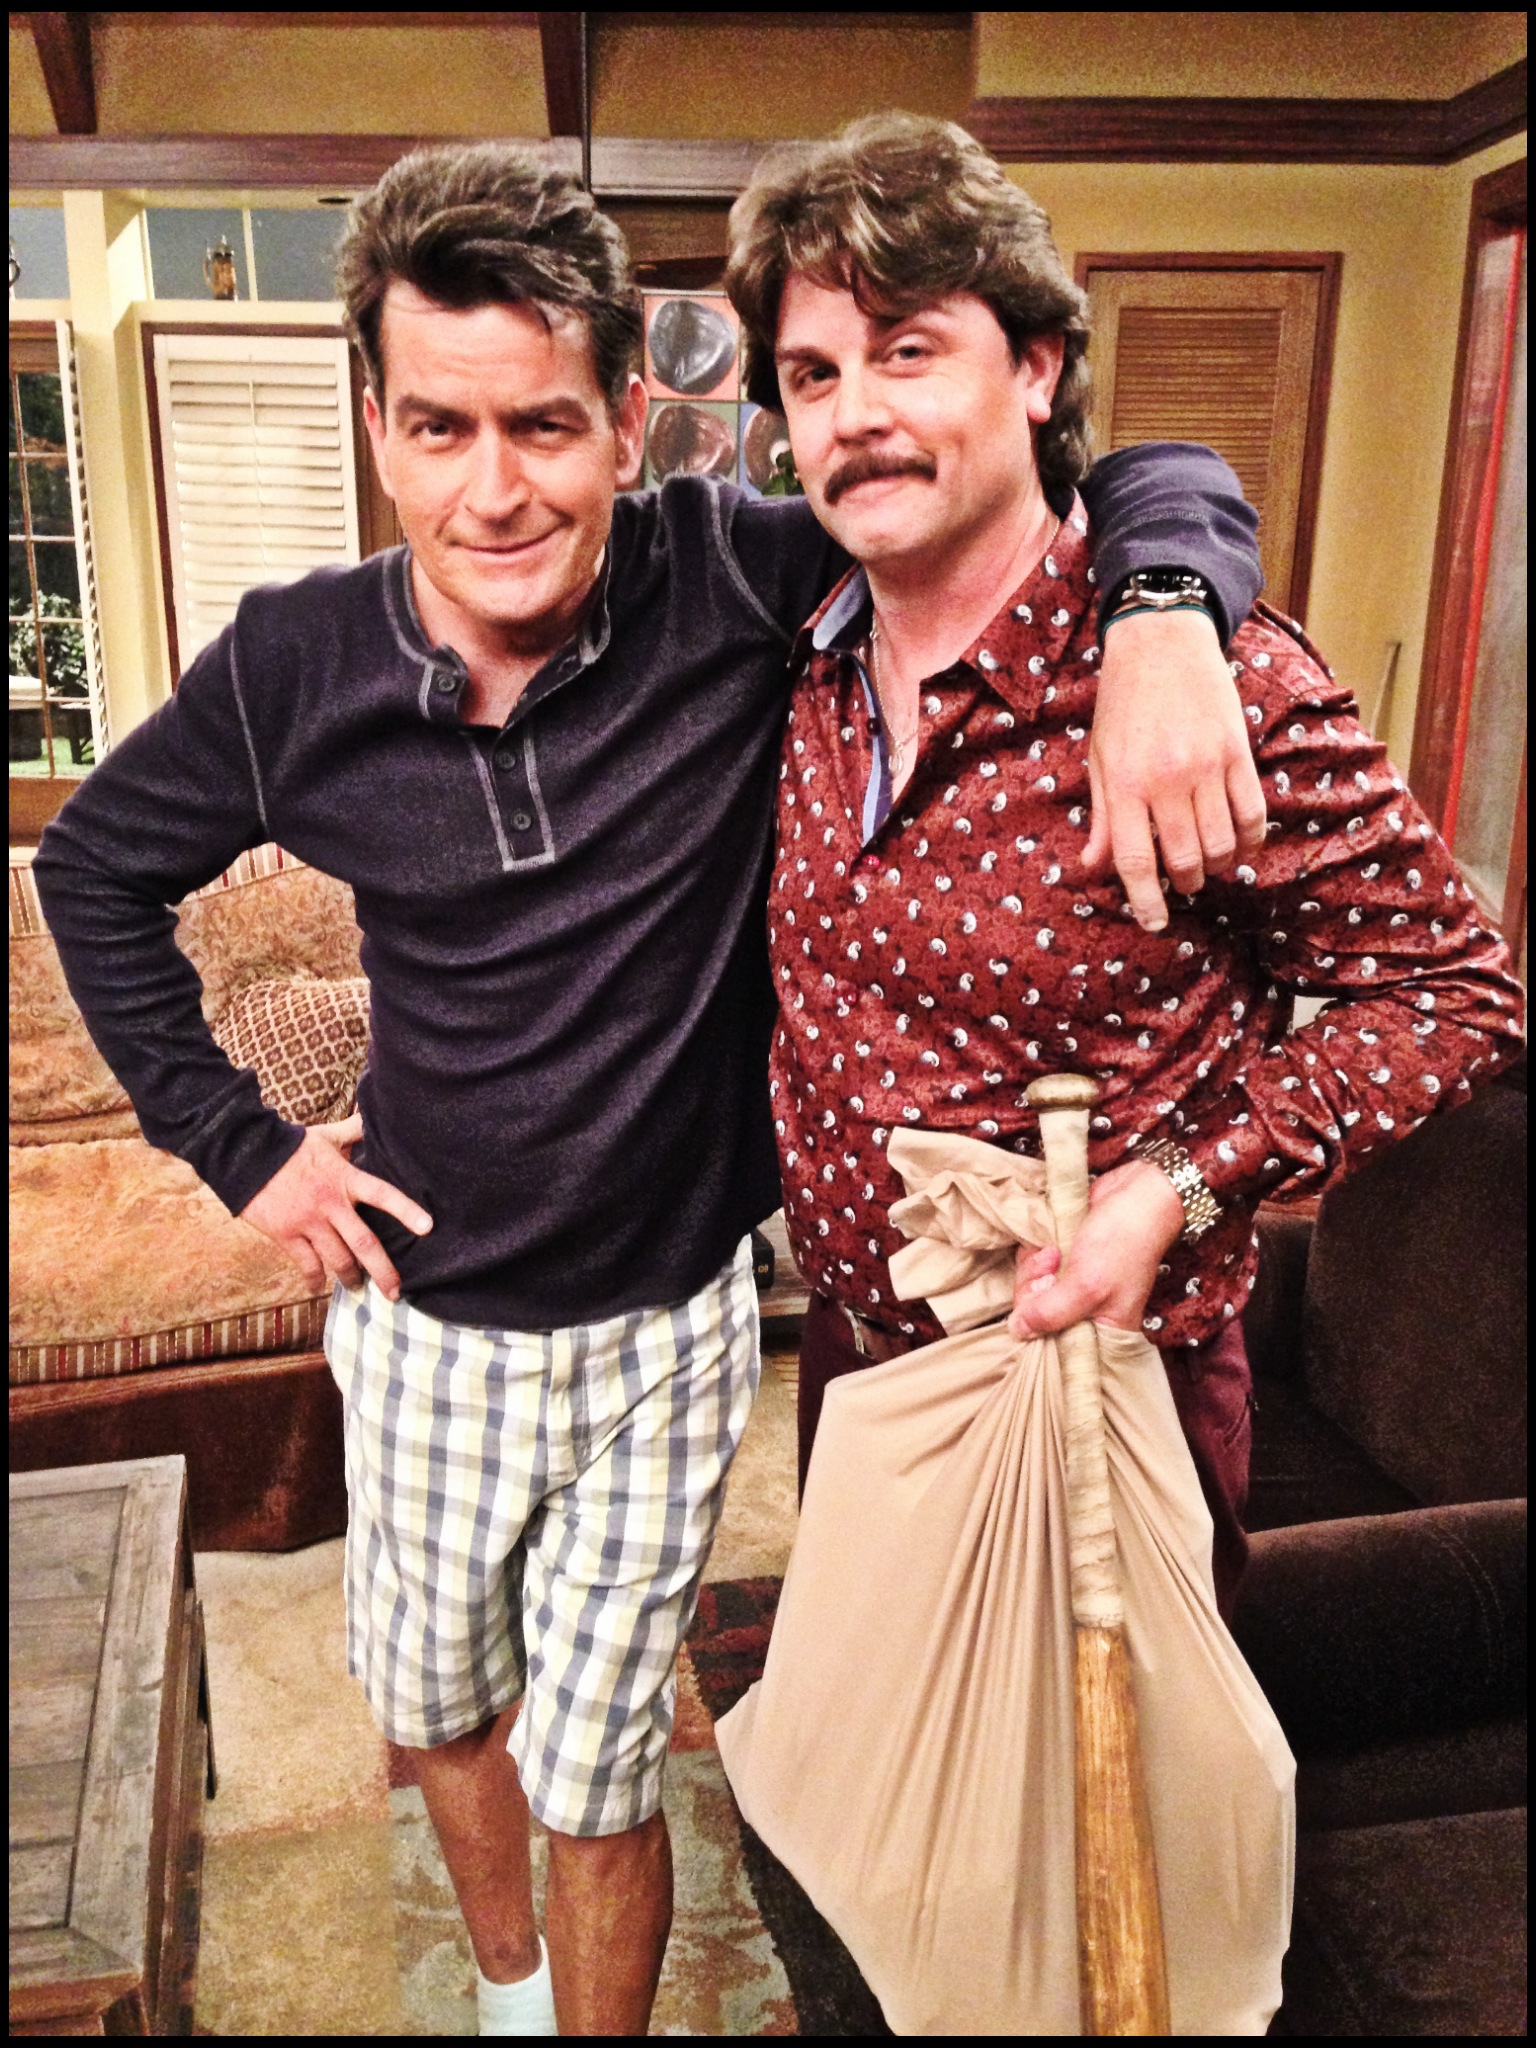 Johnny & Charlie Sheen on the set of Anger Management with Ray's bat & bag of guns.